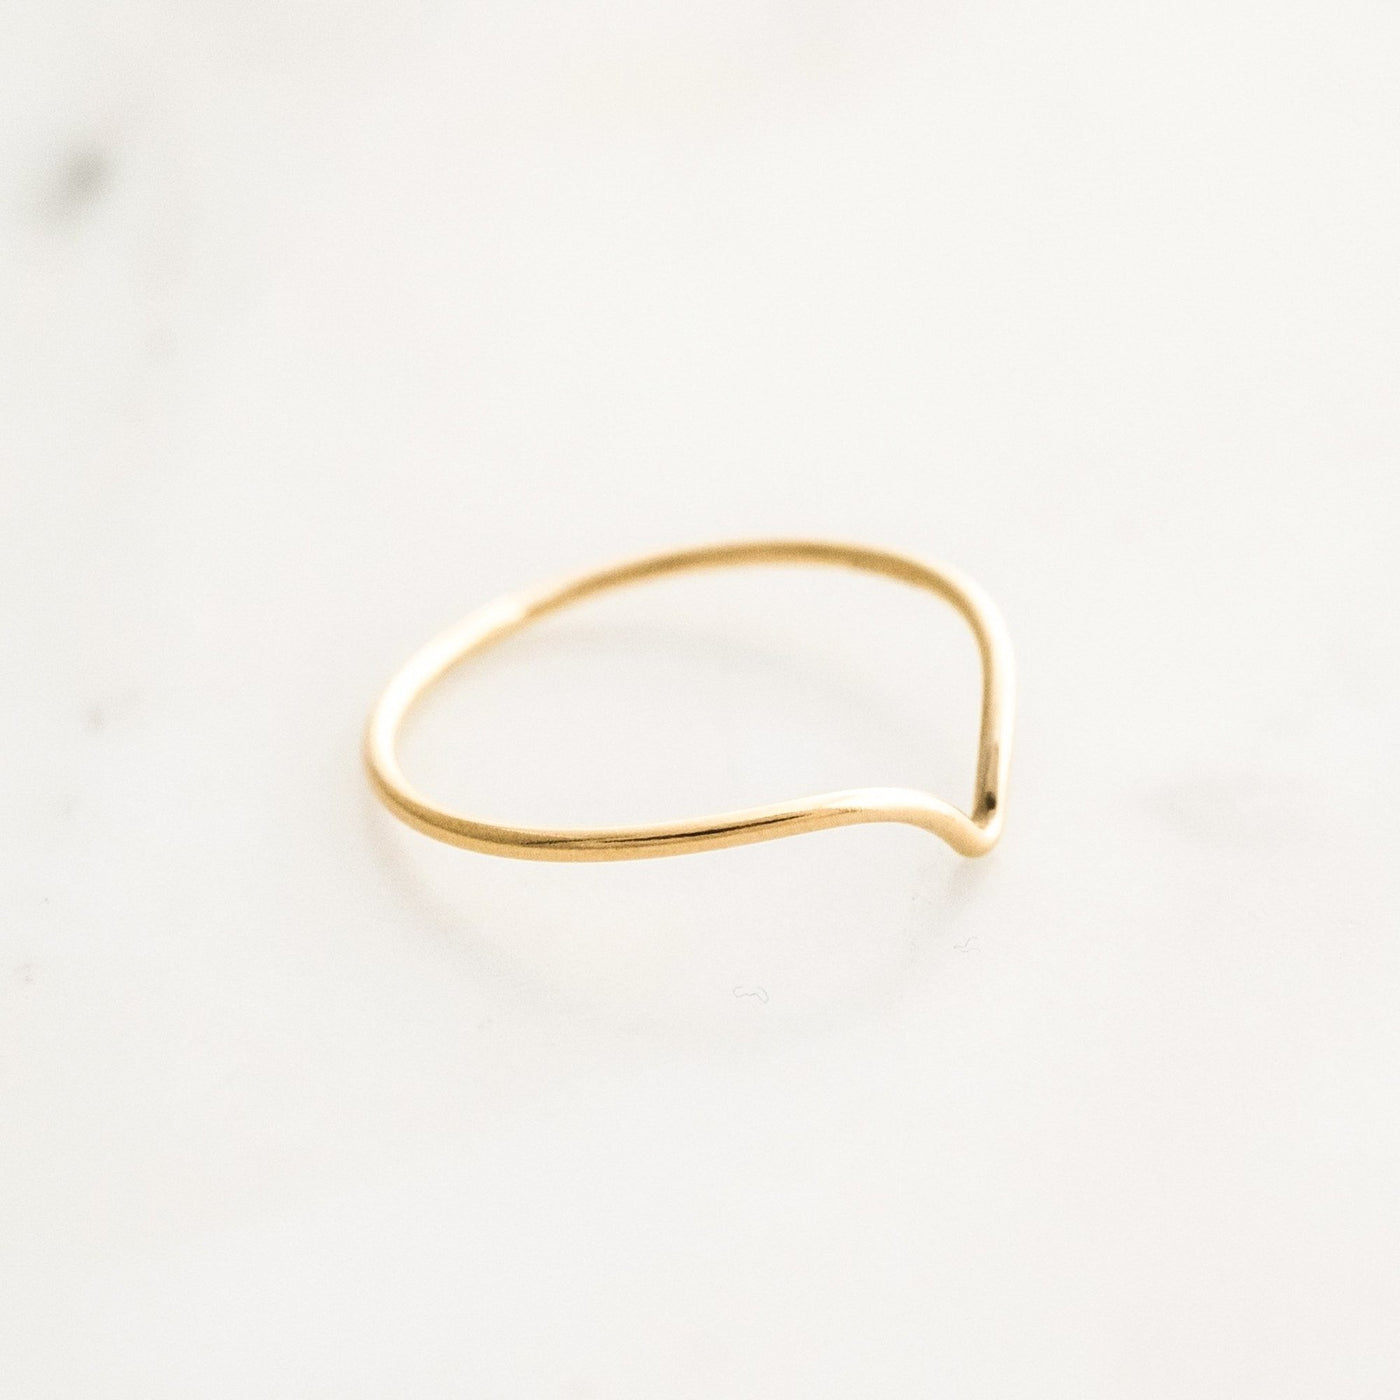 Chevron Ring by Simple & Dainty Jewelry